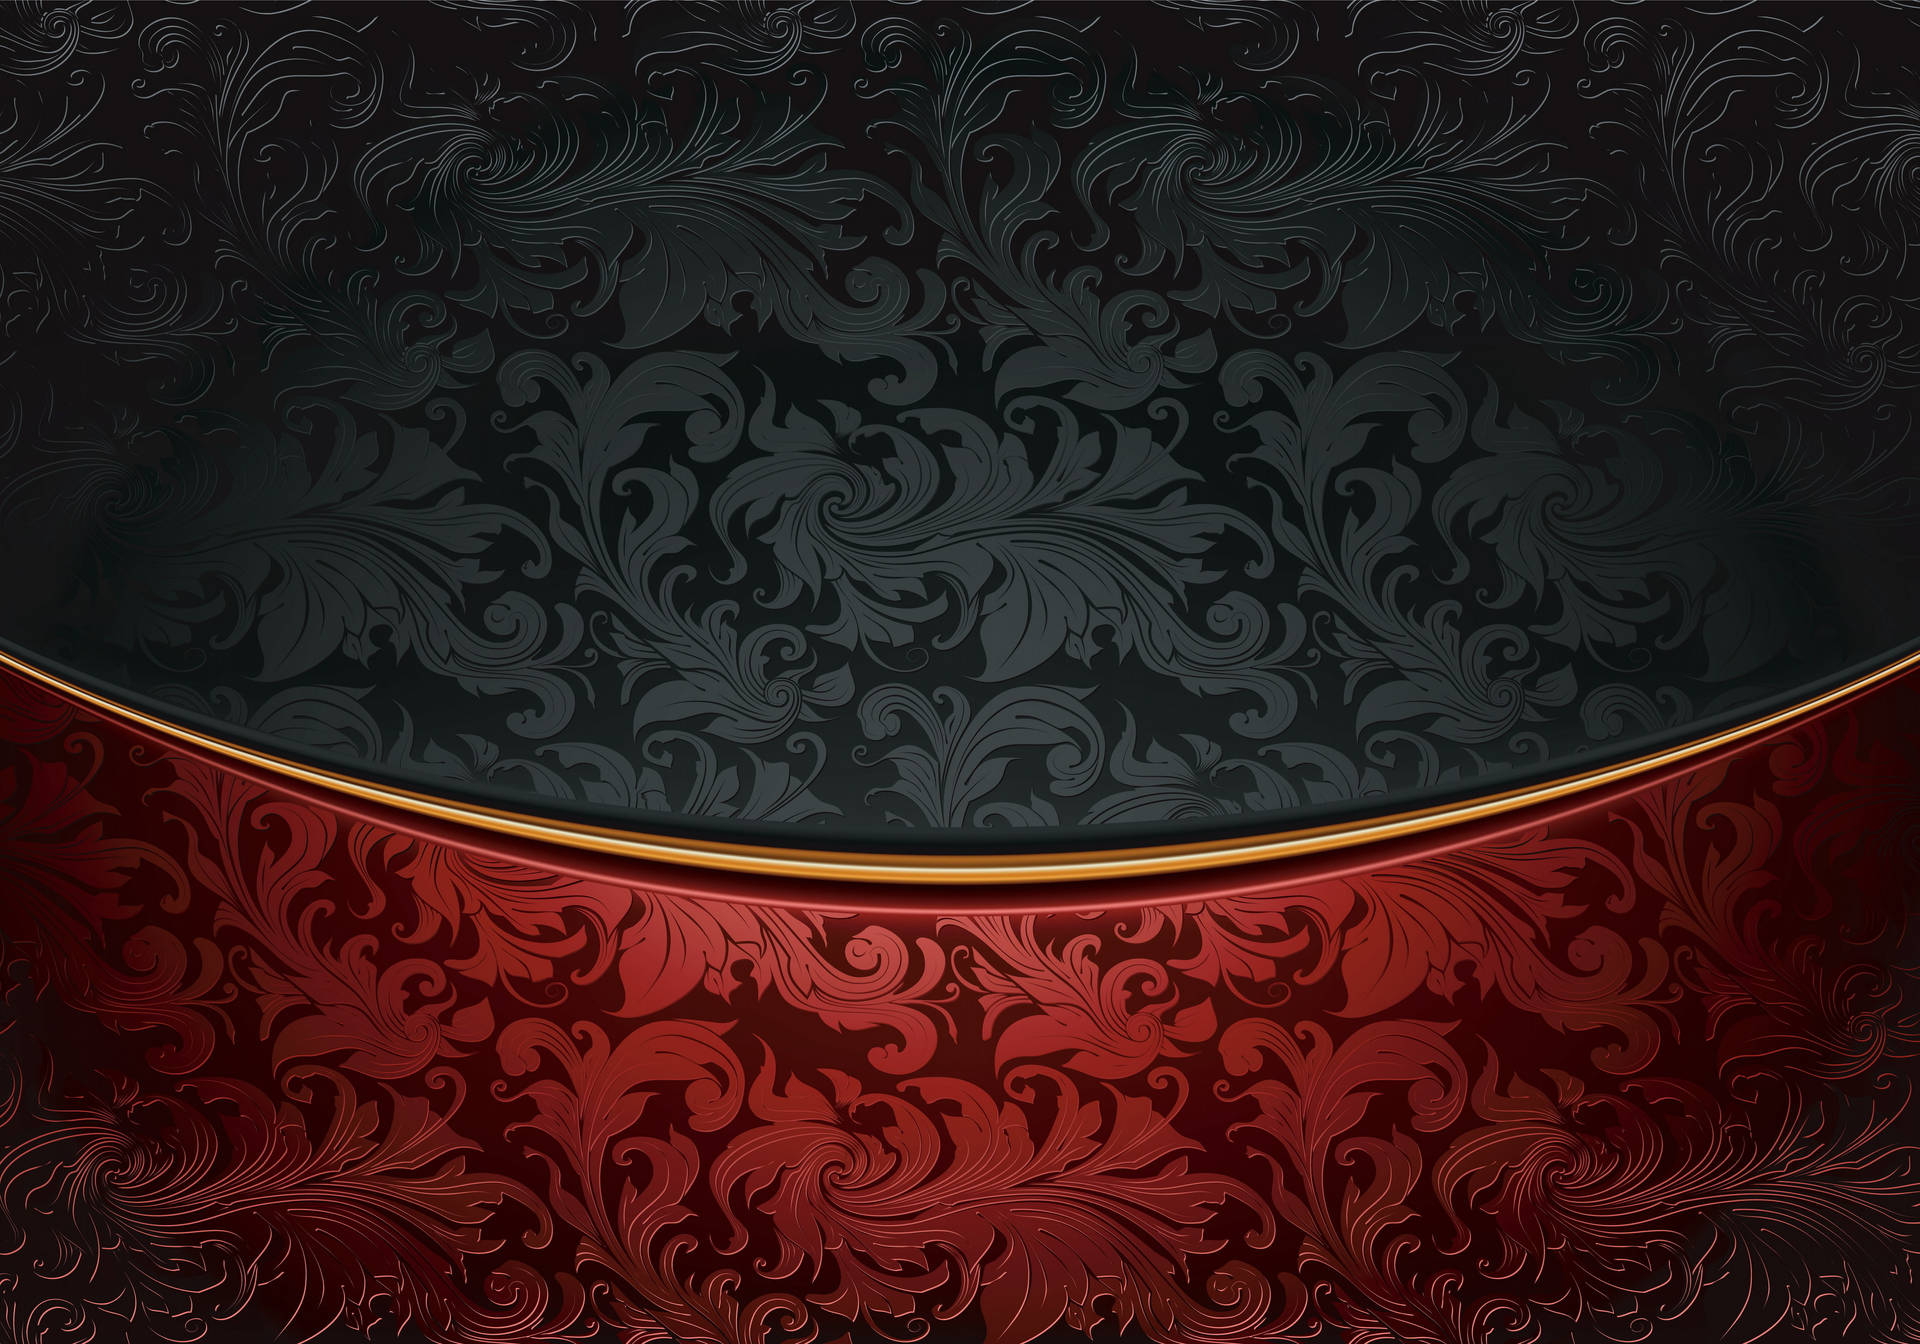 Classic Red And Black Floral Patterns Background